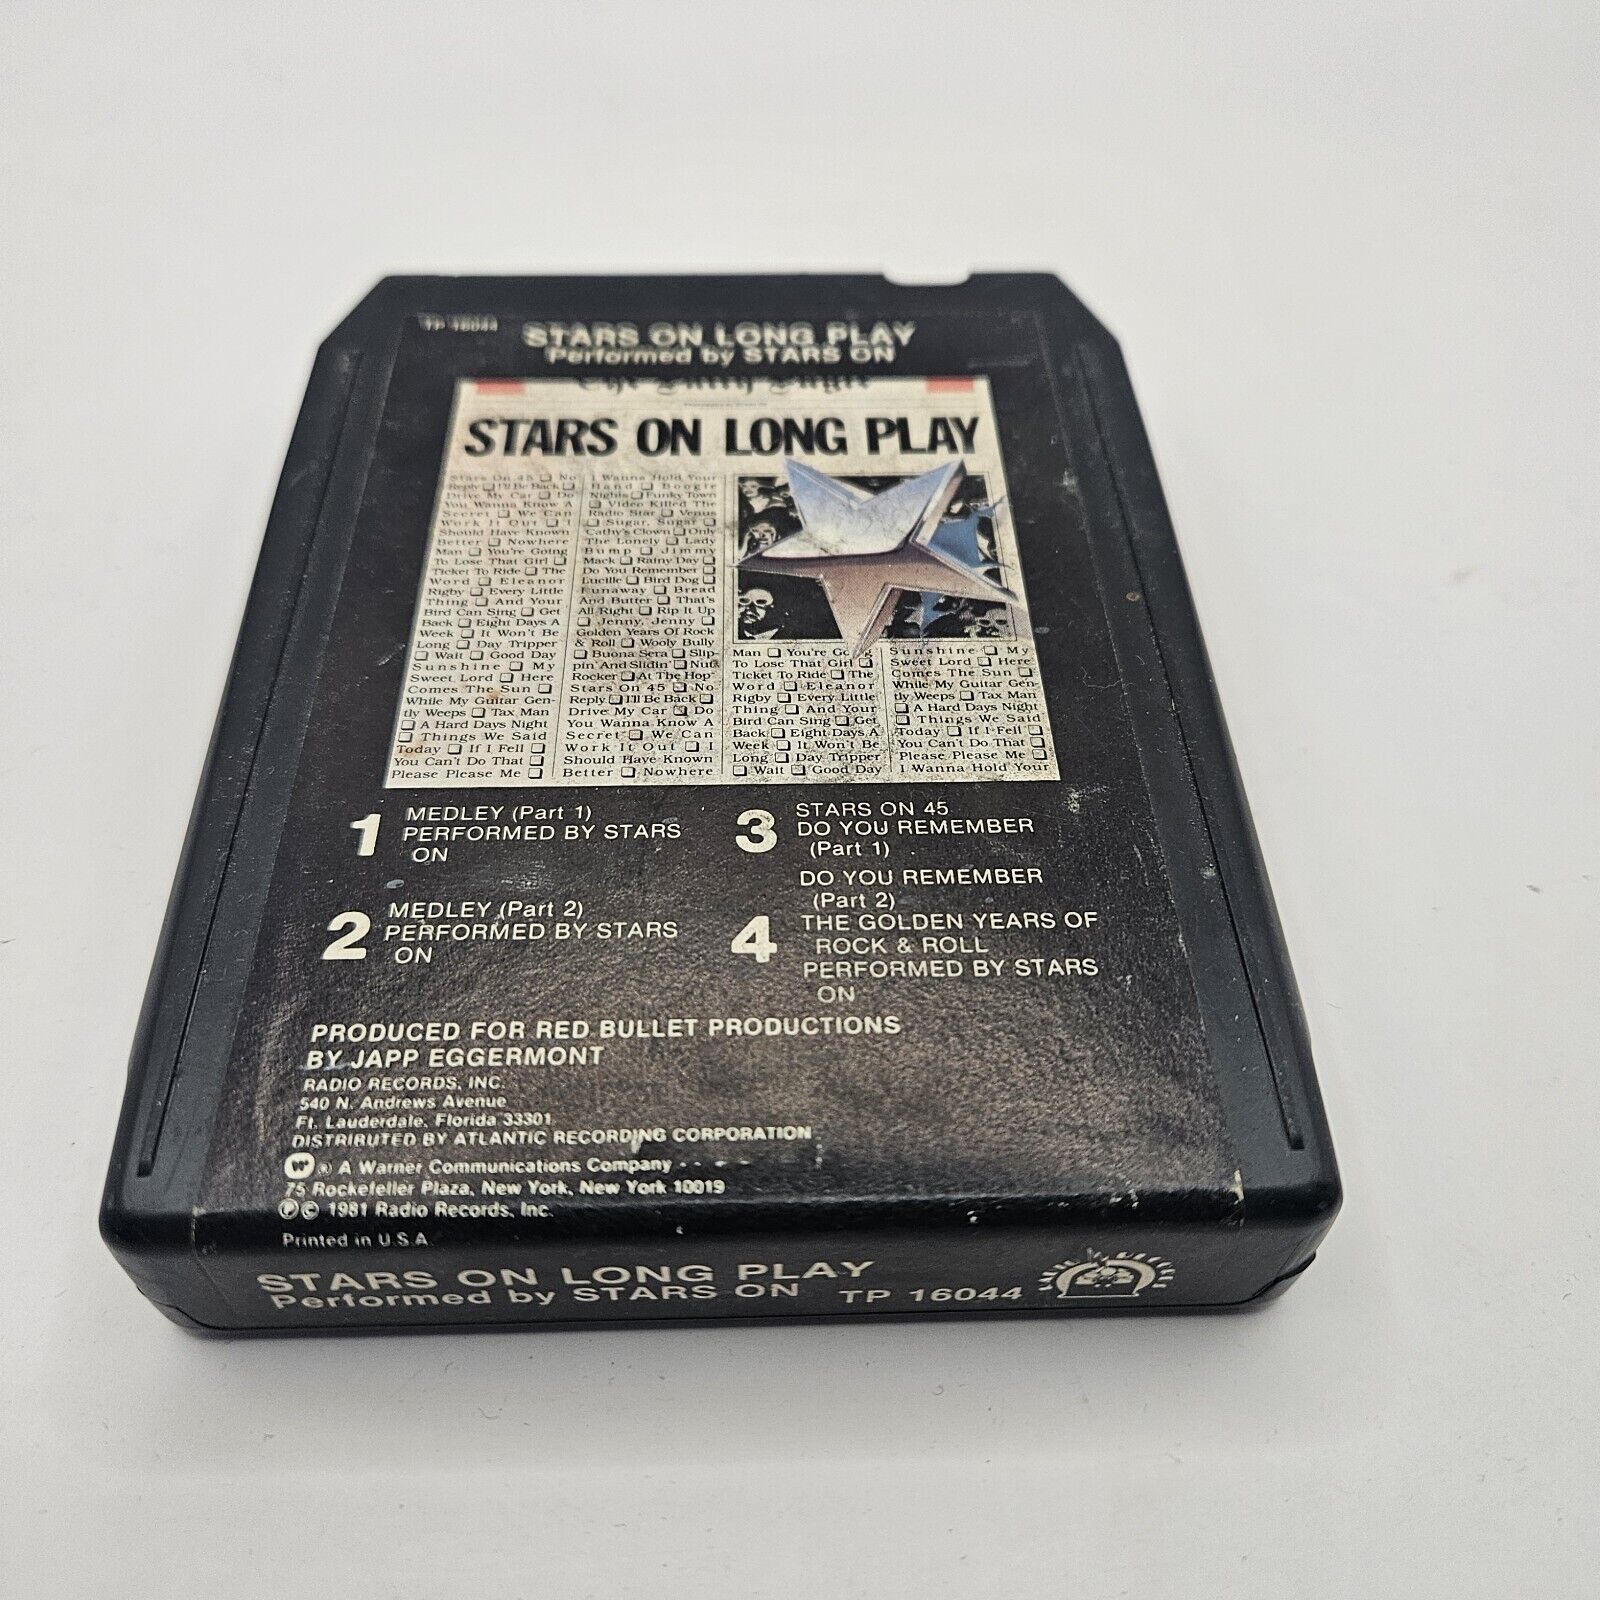 Stars On Long Play 8-Track Tape TP-16044 Radio Records 1981 Untested